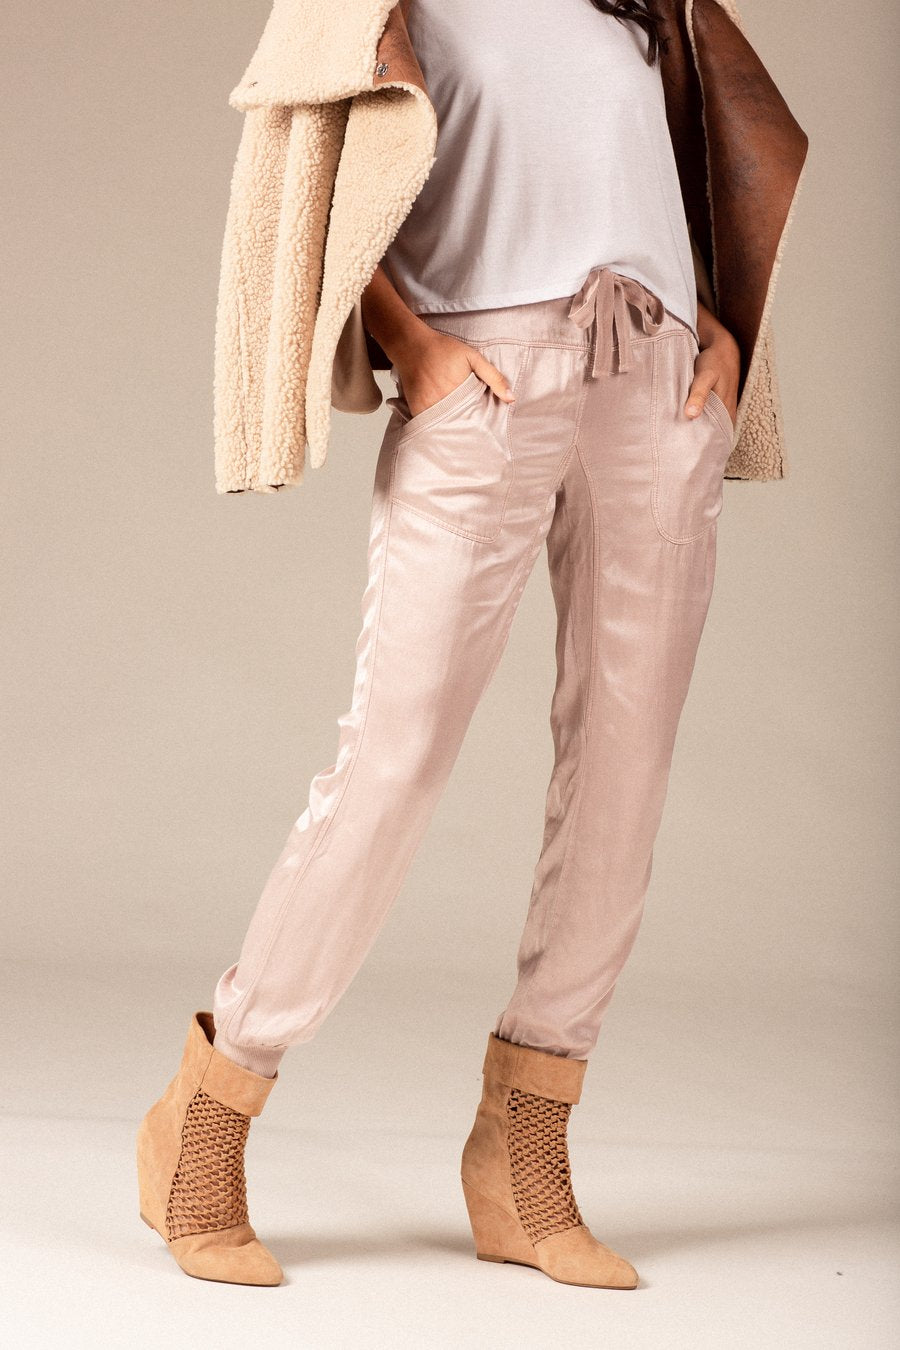 Liam Silky Joggers in Blush by Marrakech